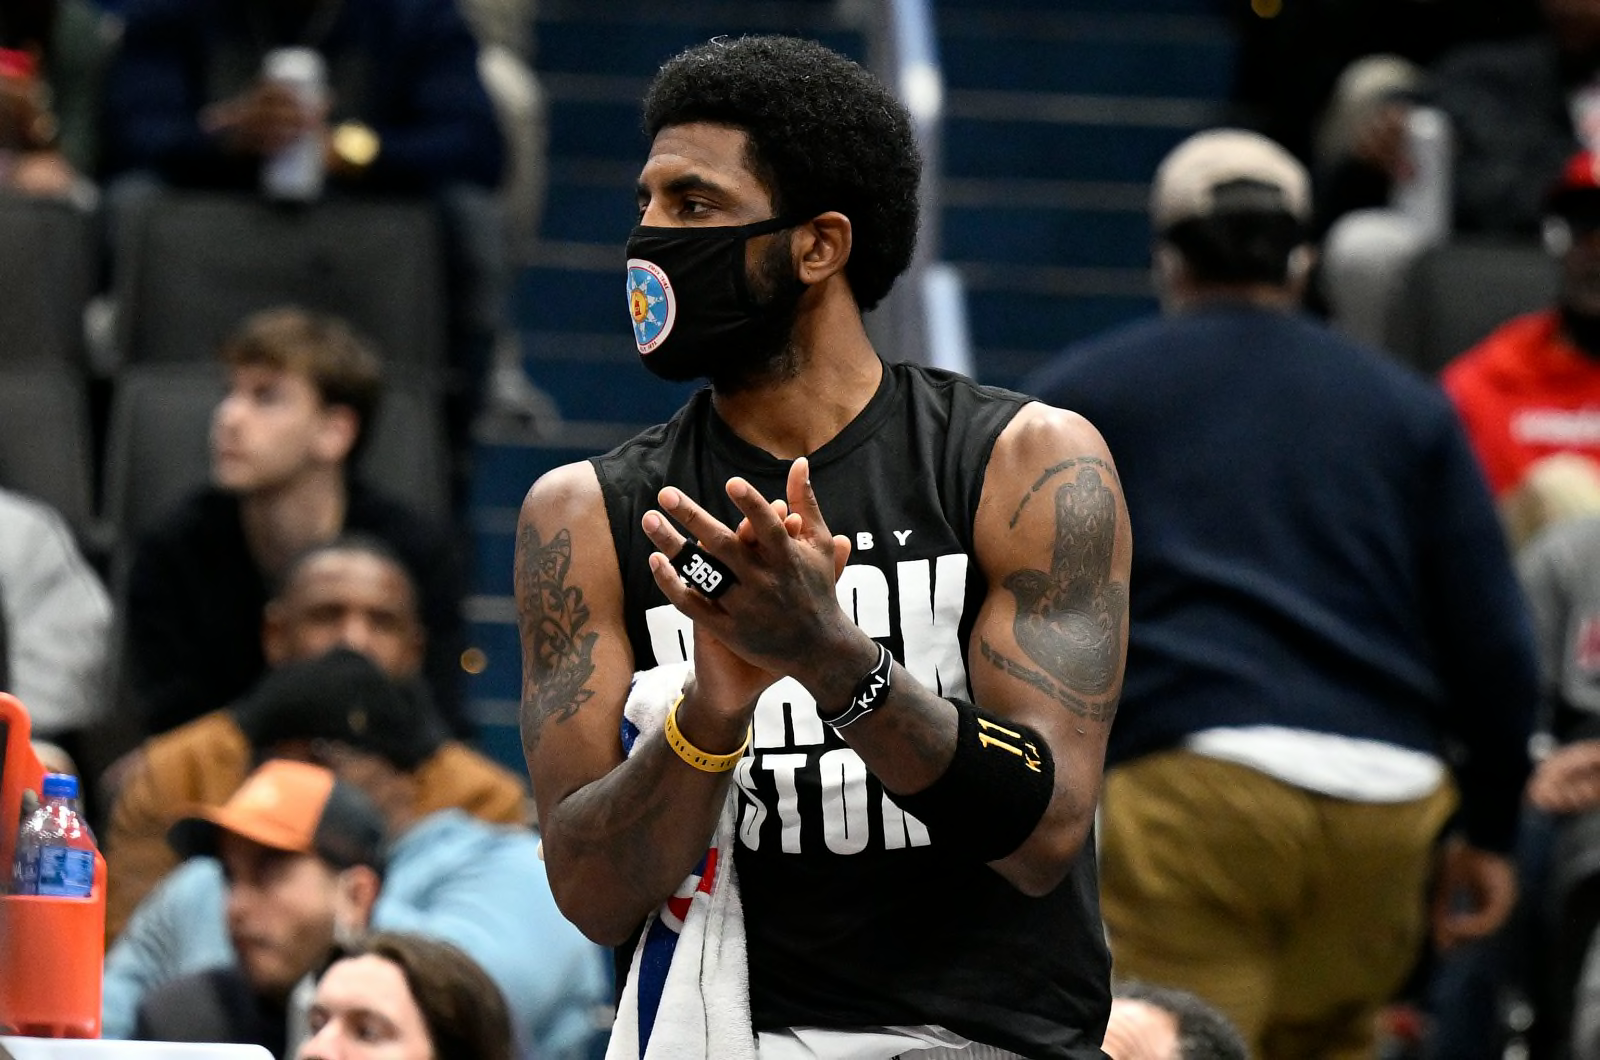 New York lifted vaccine mandates, but Kyrie Irving still can't play